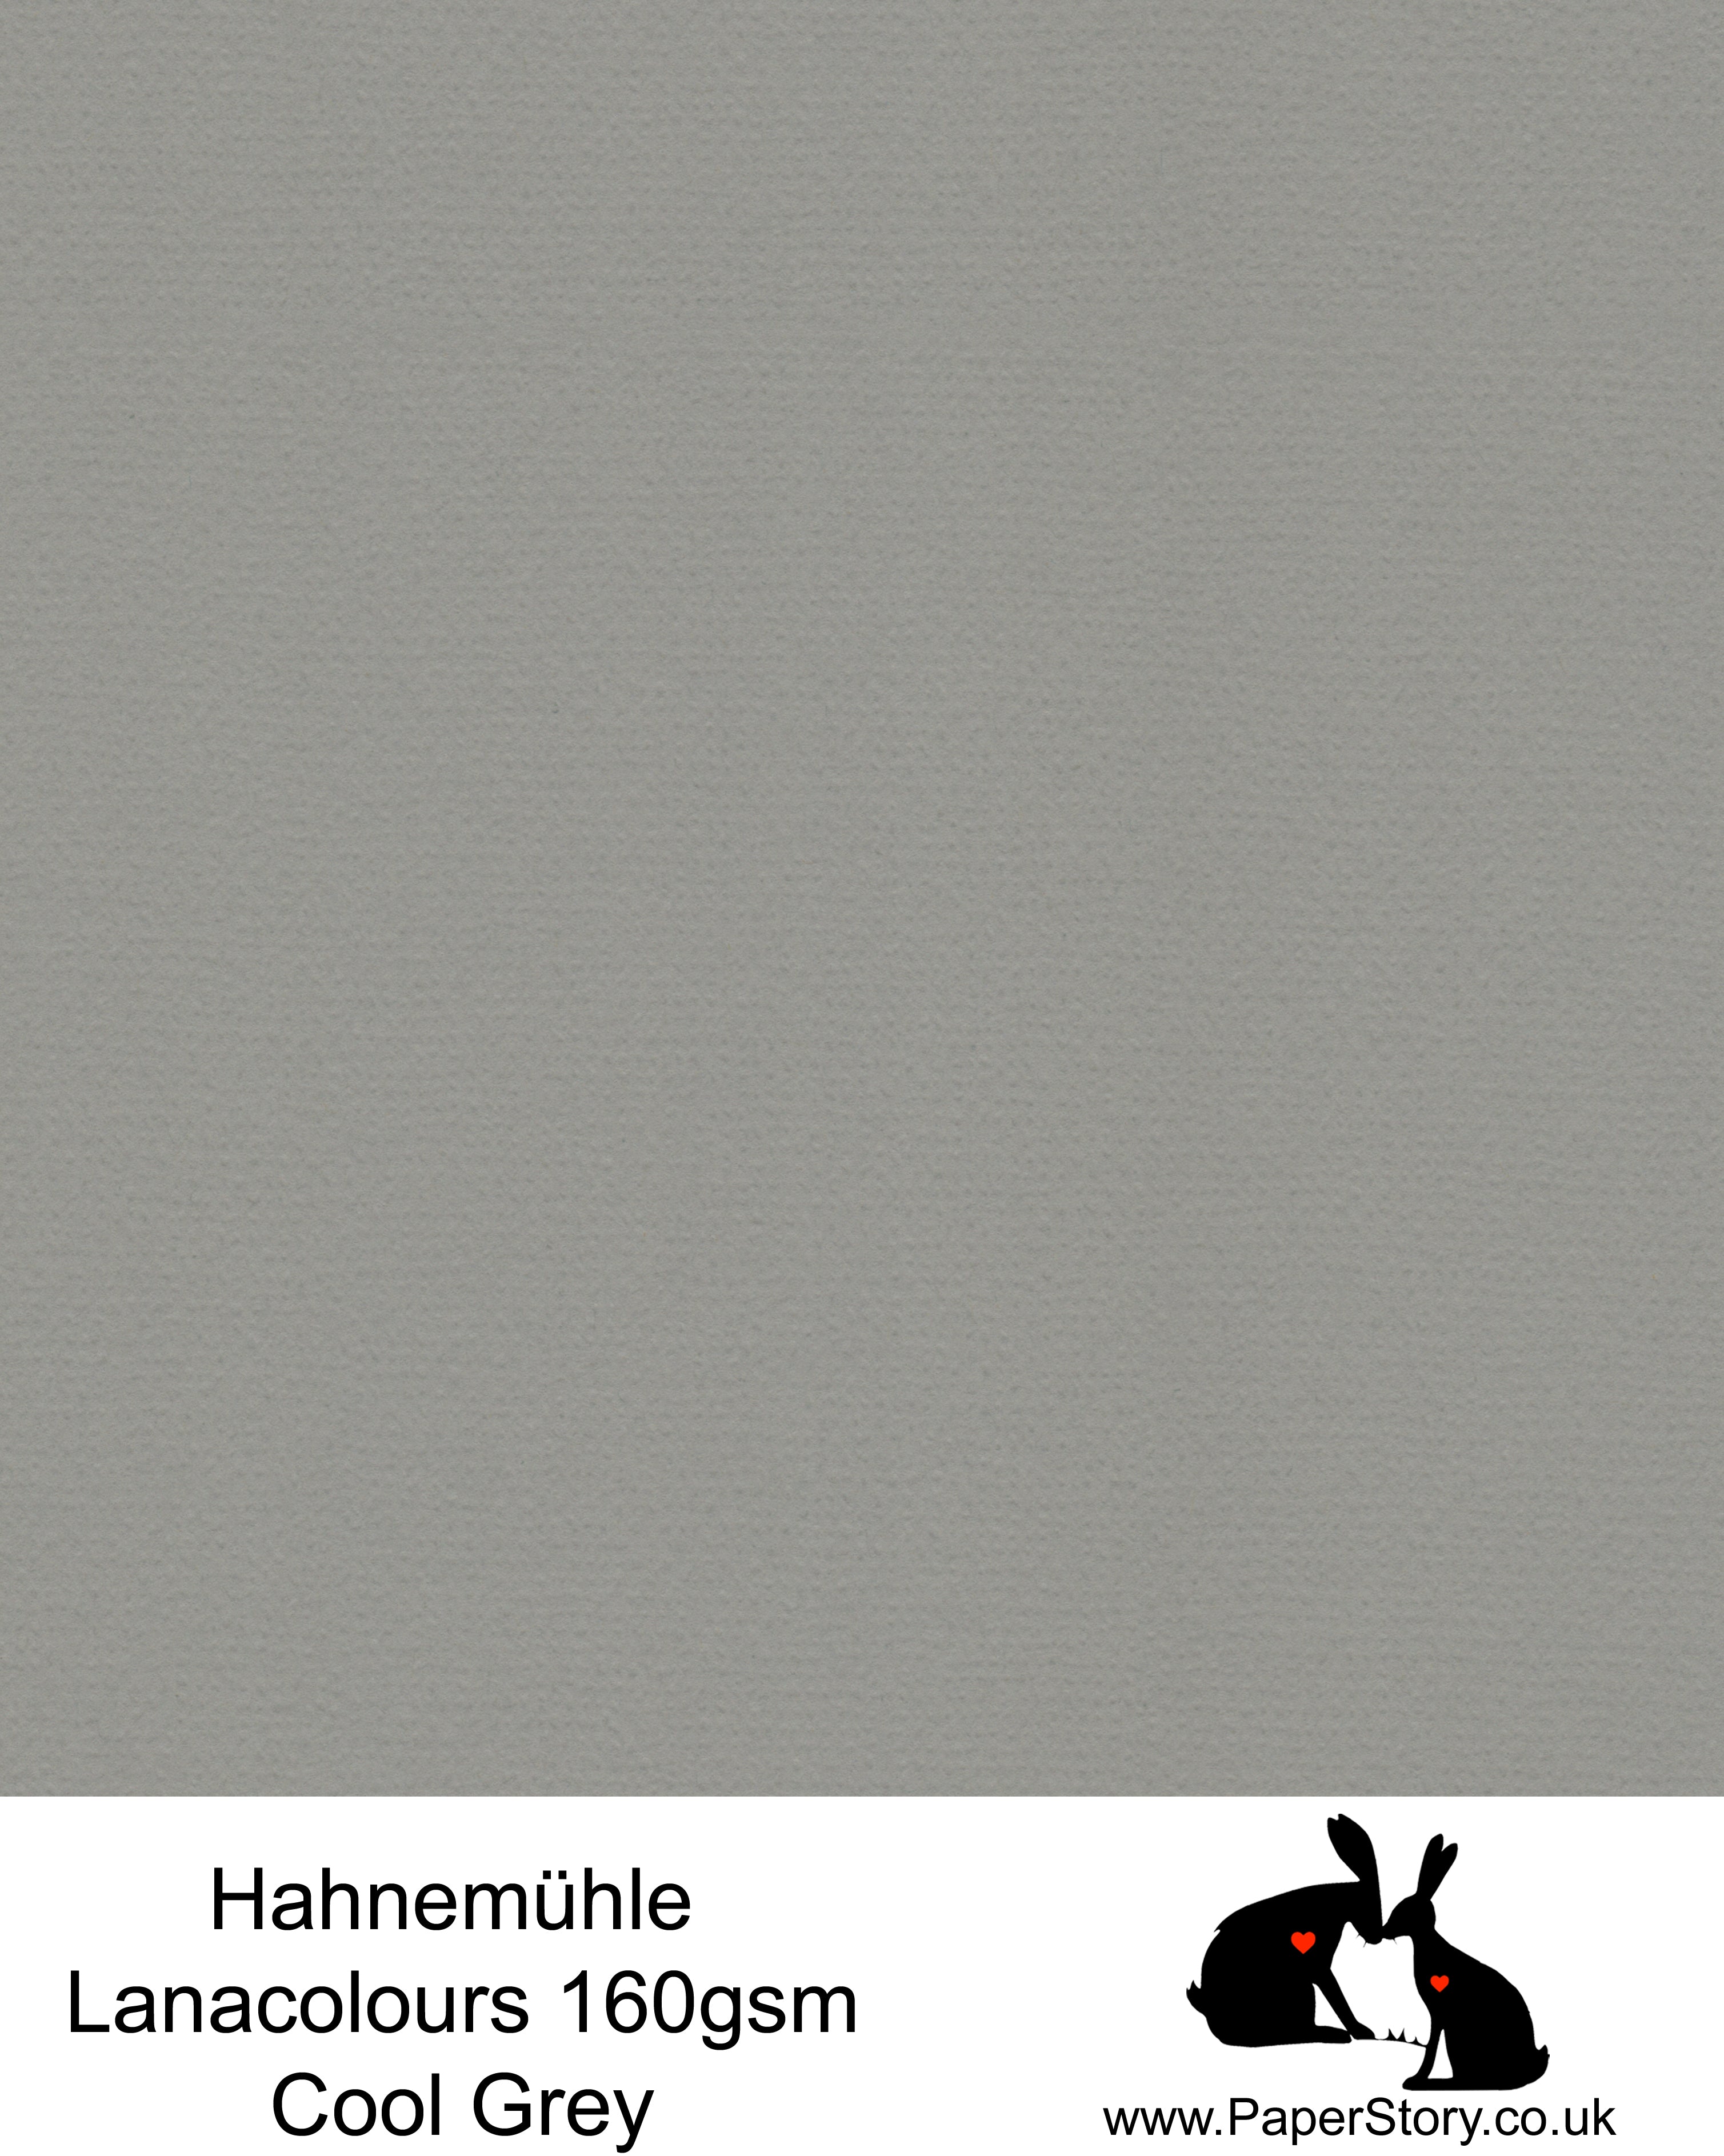 Hahnemühle Lana Colours cool grey, classic pastel hammered paper 160 gsm. Artist Premium Pastel and Papercutting Papers 160 gsm often described as hammered paper.